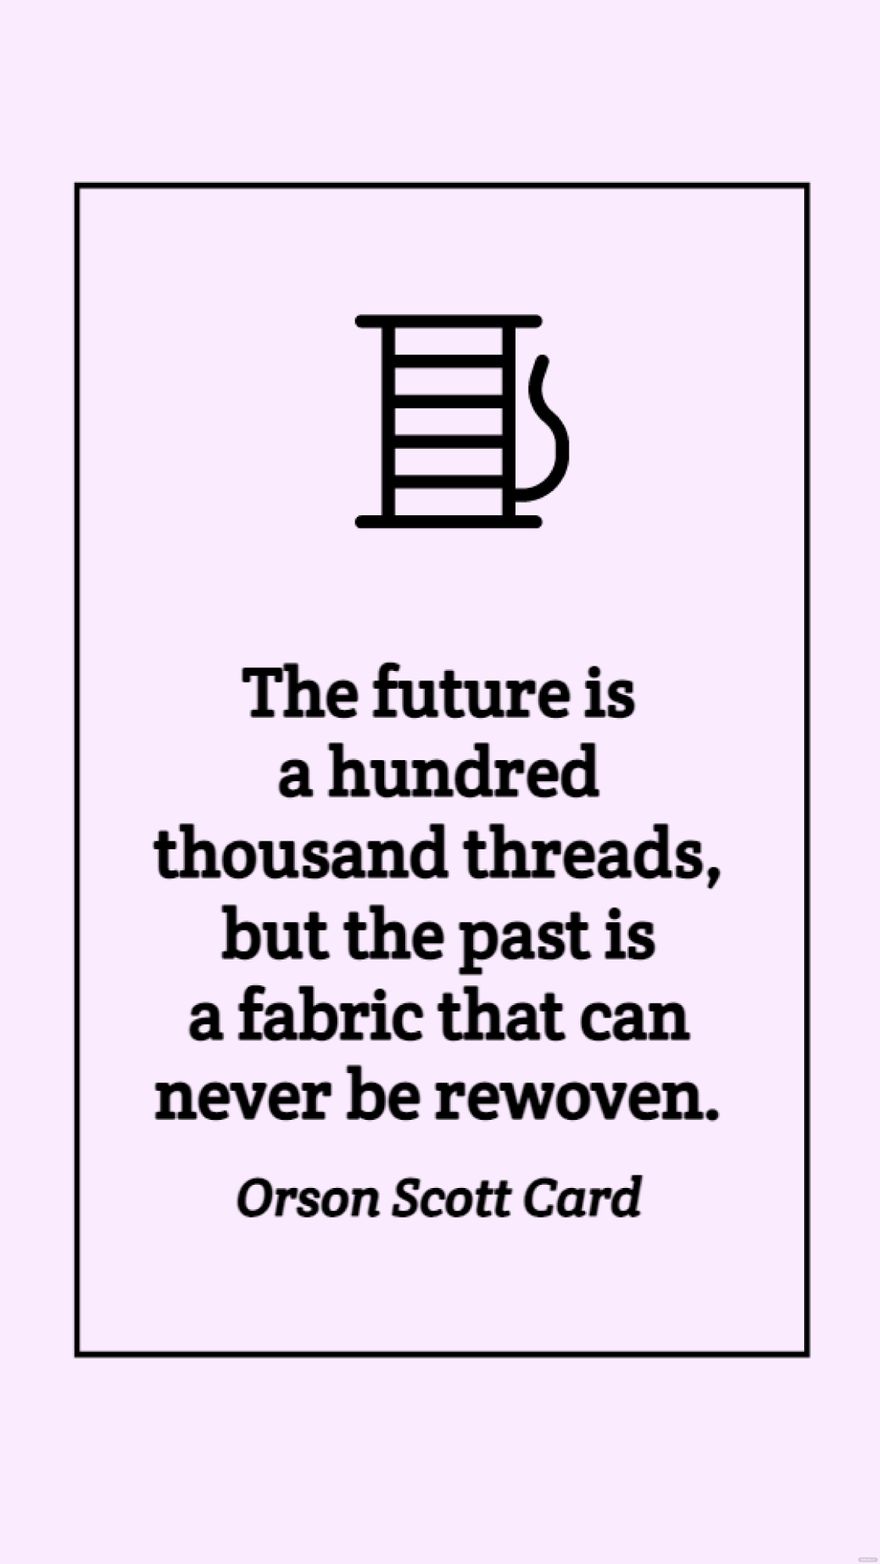 Orson Scott Card - The future is a hundred thousand threads, but the past is a fabric that can never be rewoven.